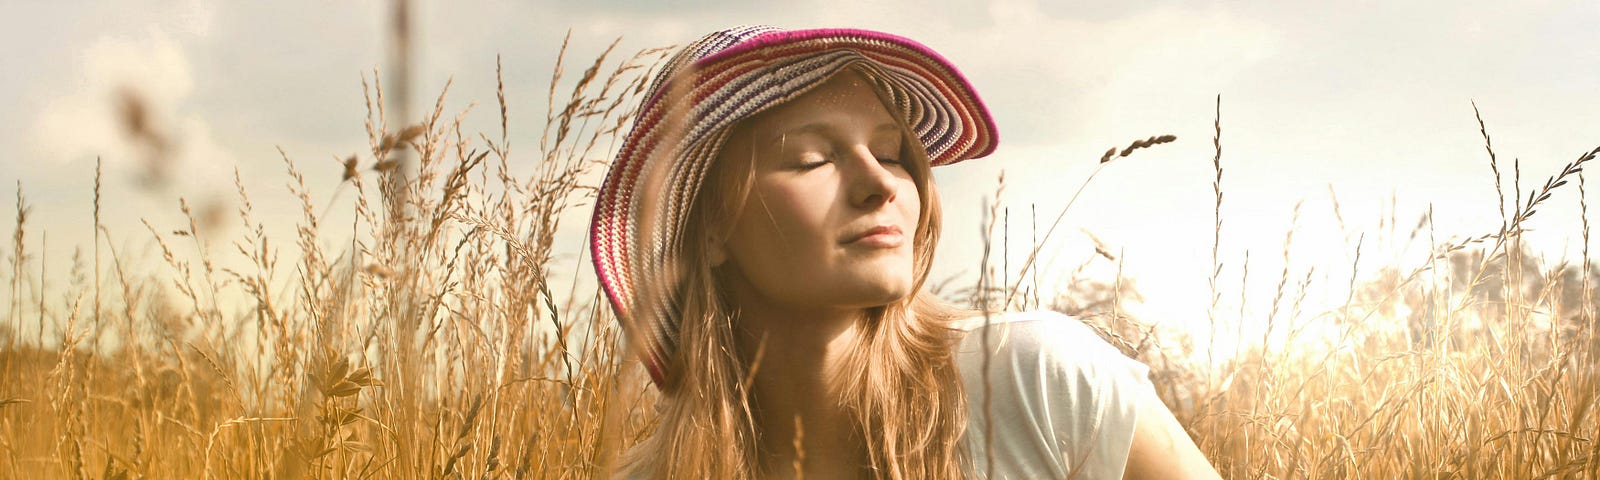 Woman Wearing White Top and Red and White Sunny Hat